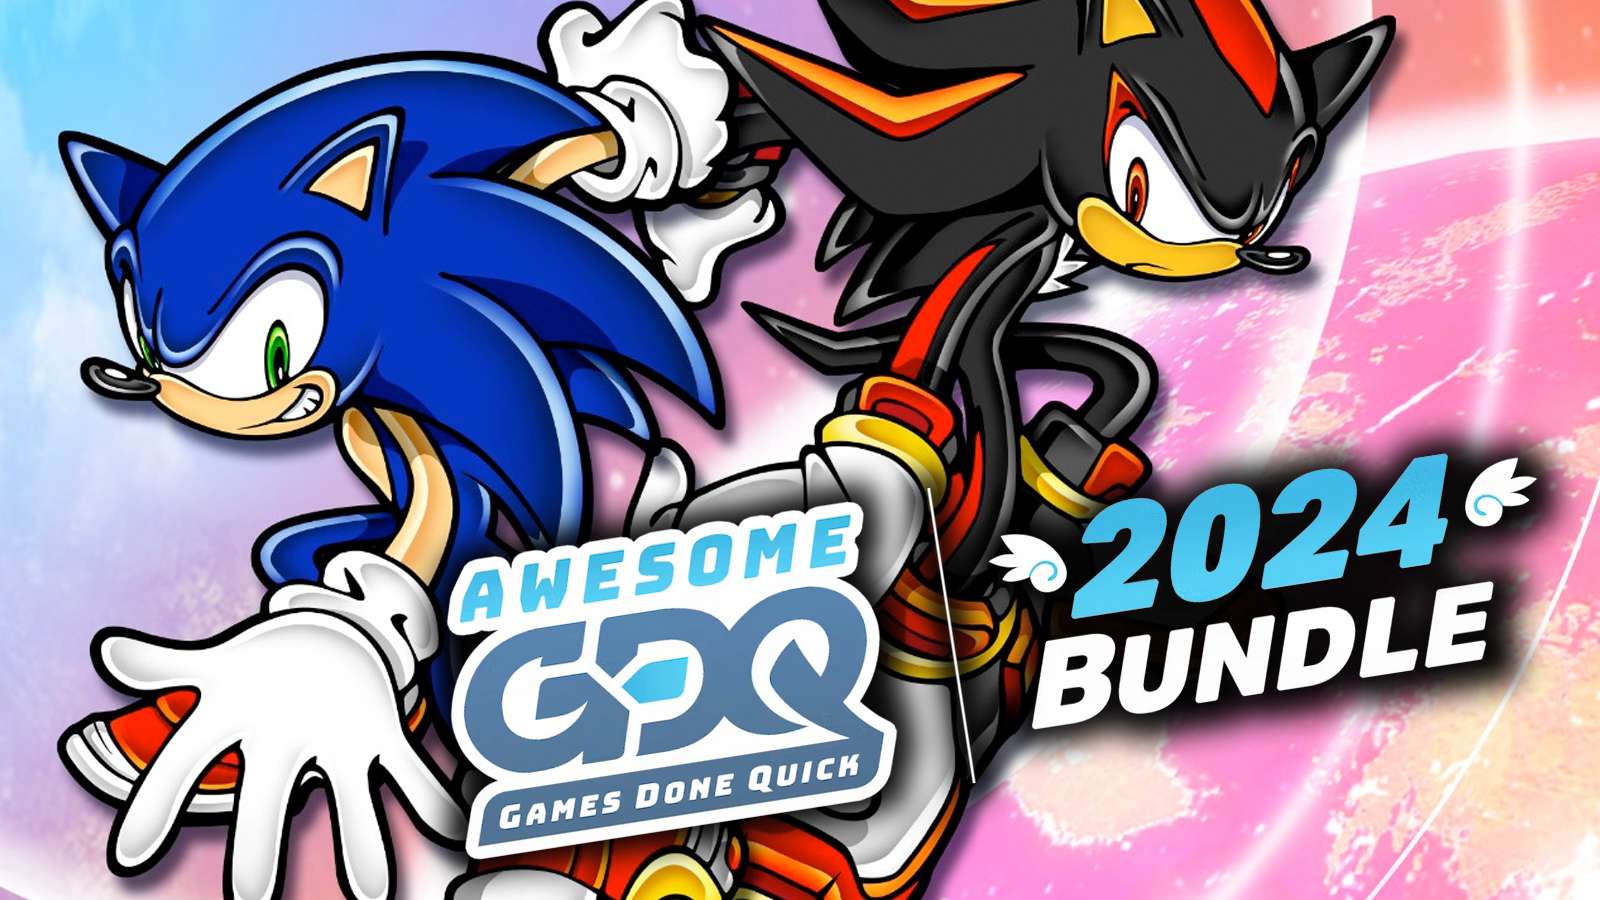 sonic and shadow the hedgehog with the agdq 2024 bundle logo overlayed